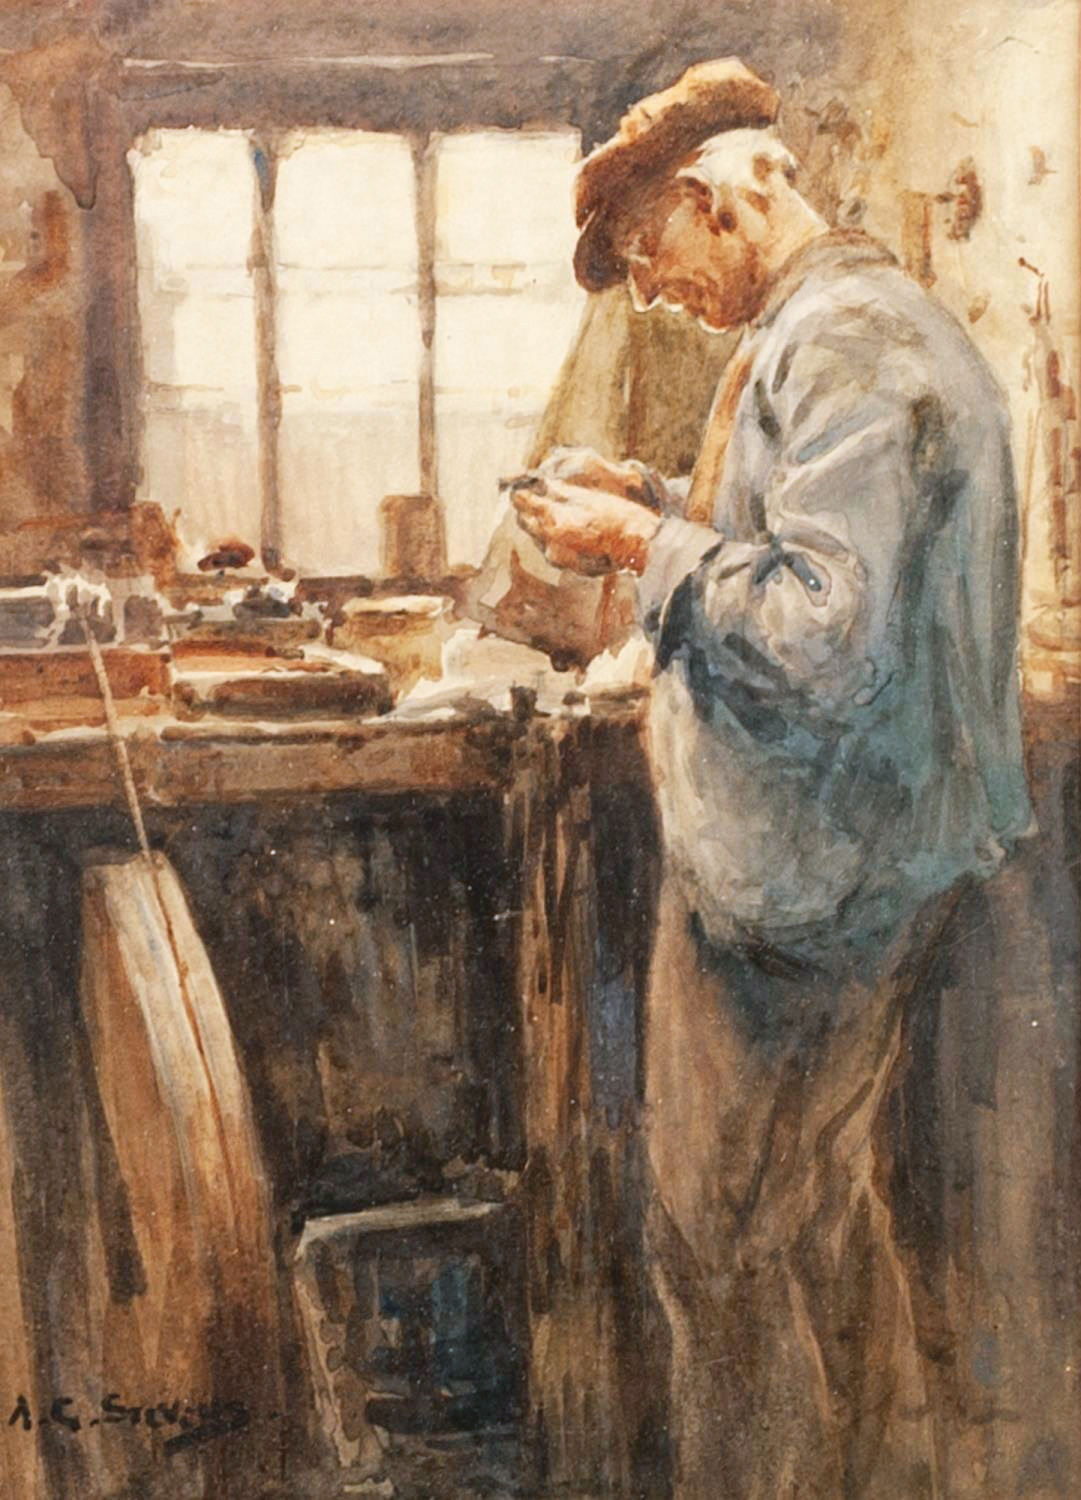 Albert George Stevens (Staithes Group 1863-1925): A Whitby Jet Worker, watercolour